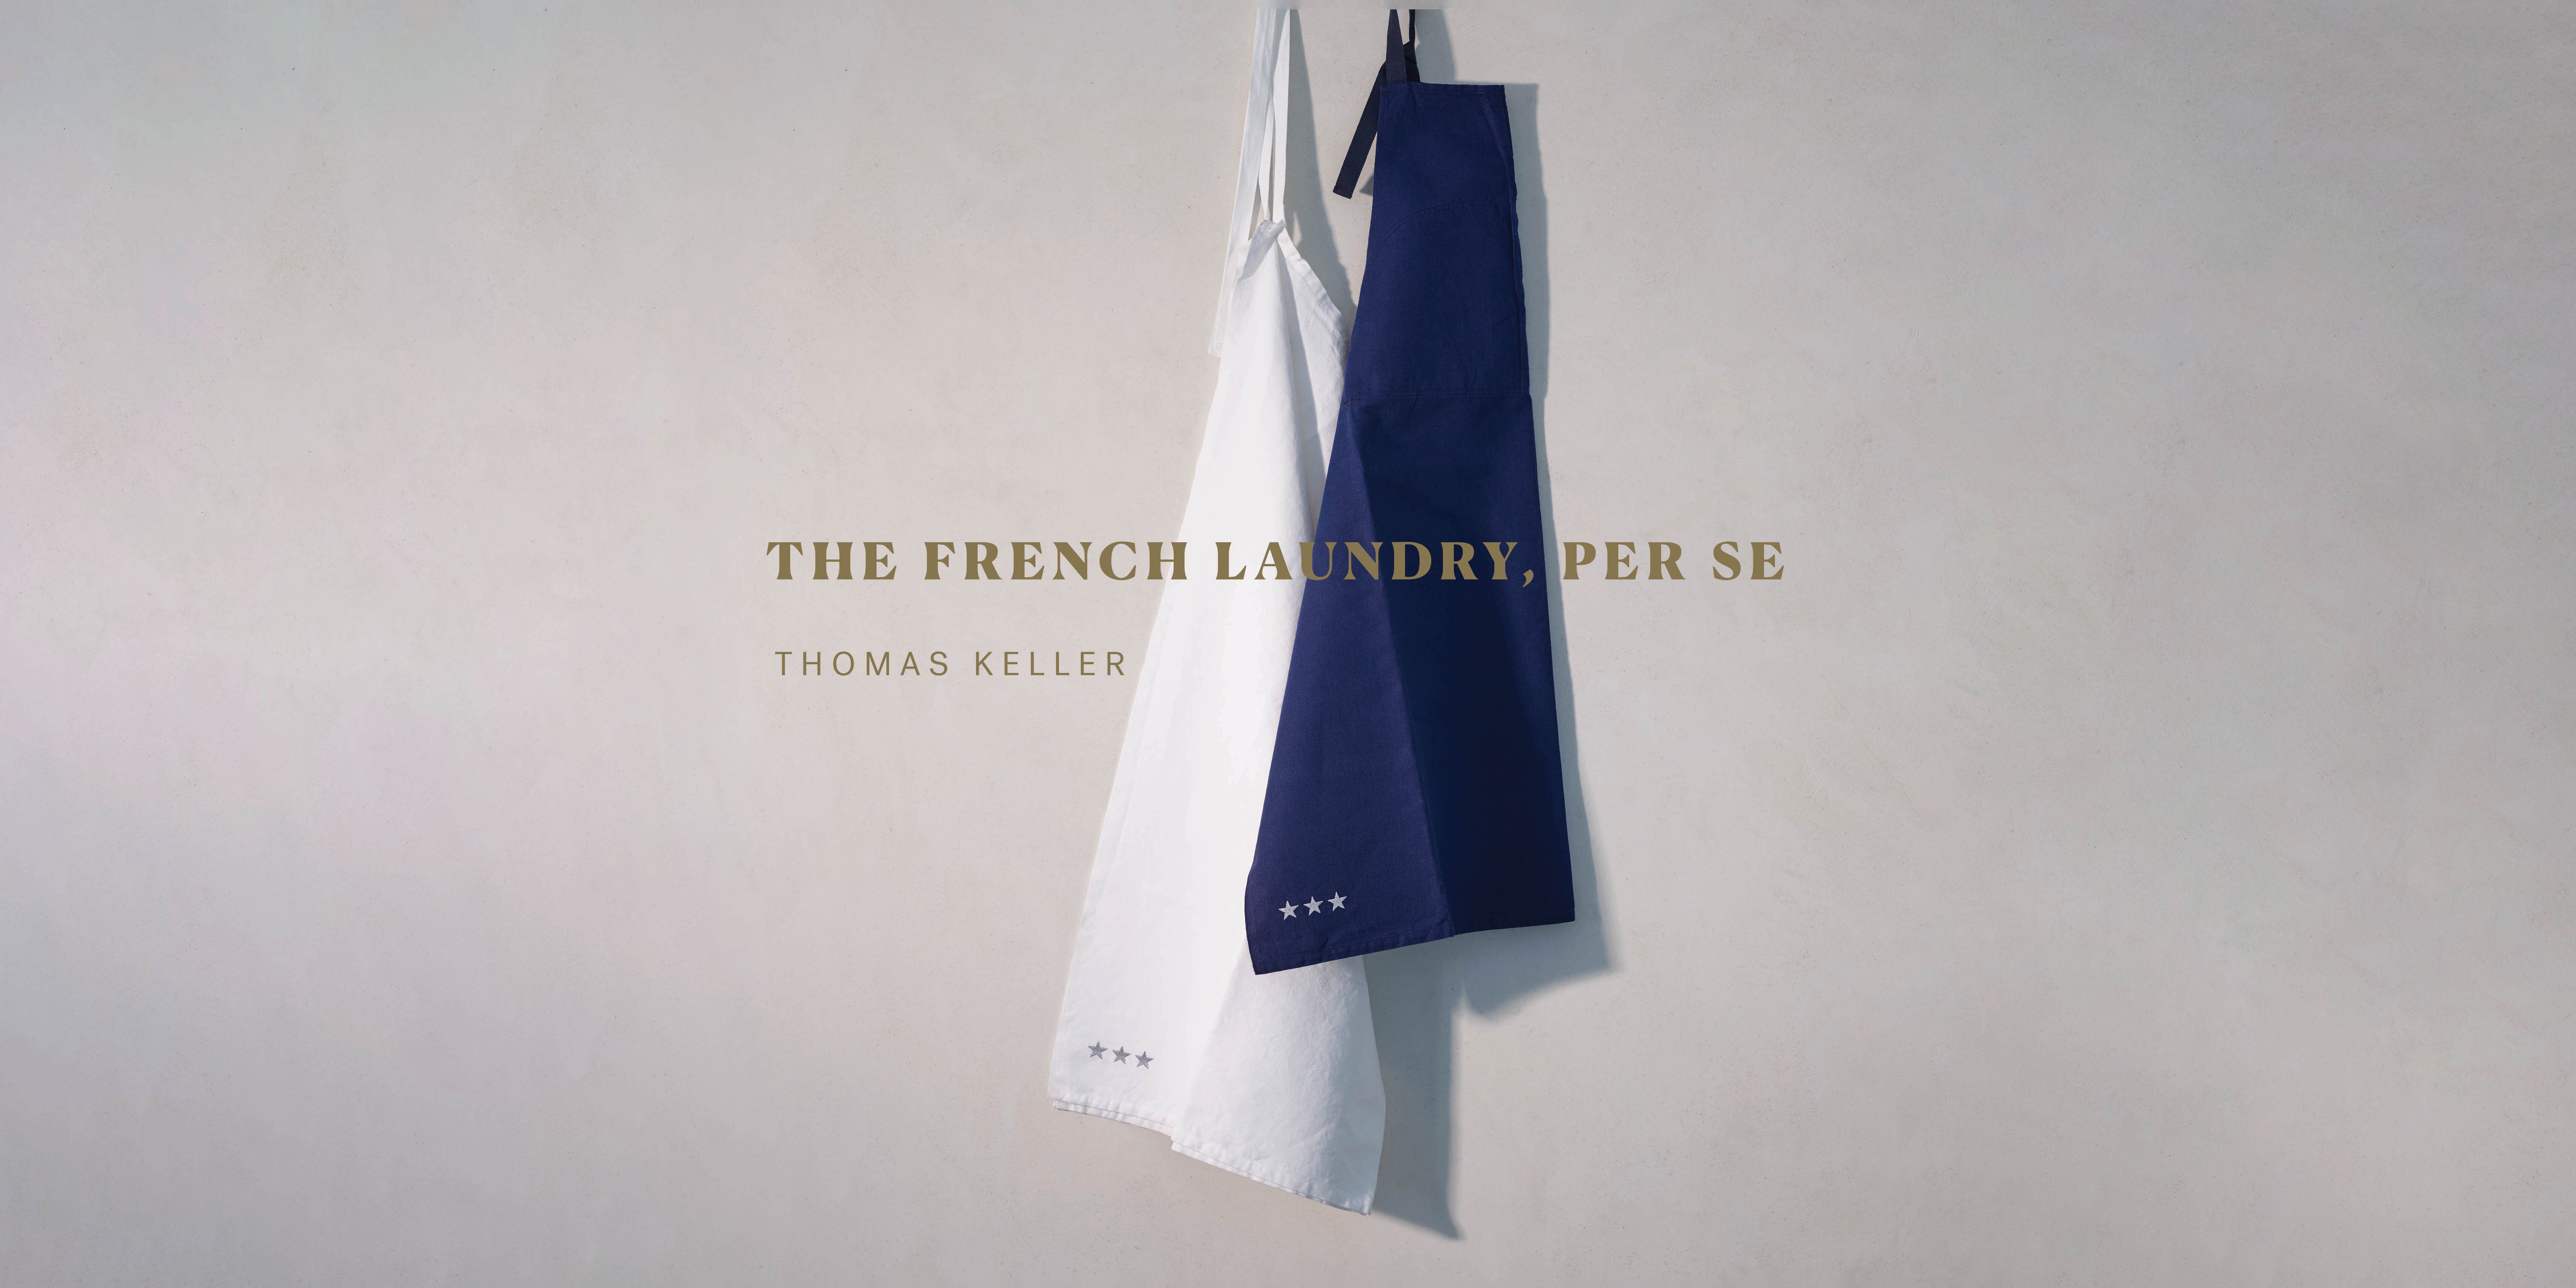 Book review: The French Laundry, Per Se, by Thomas Keller